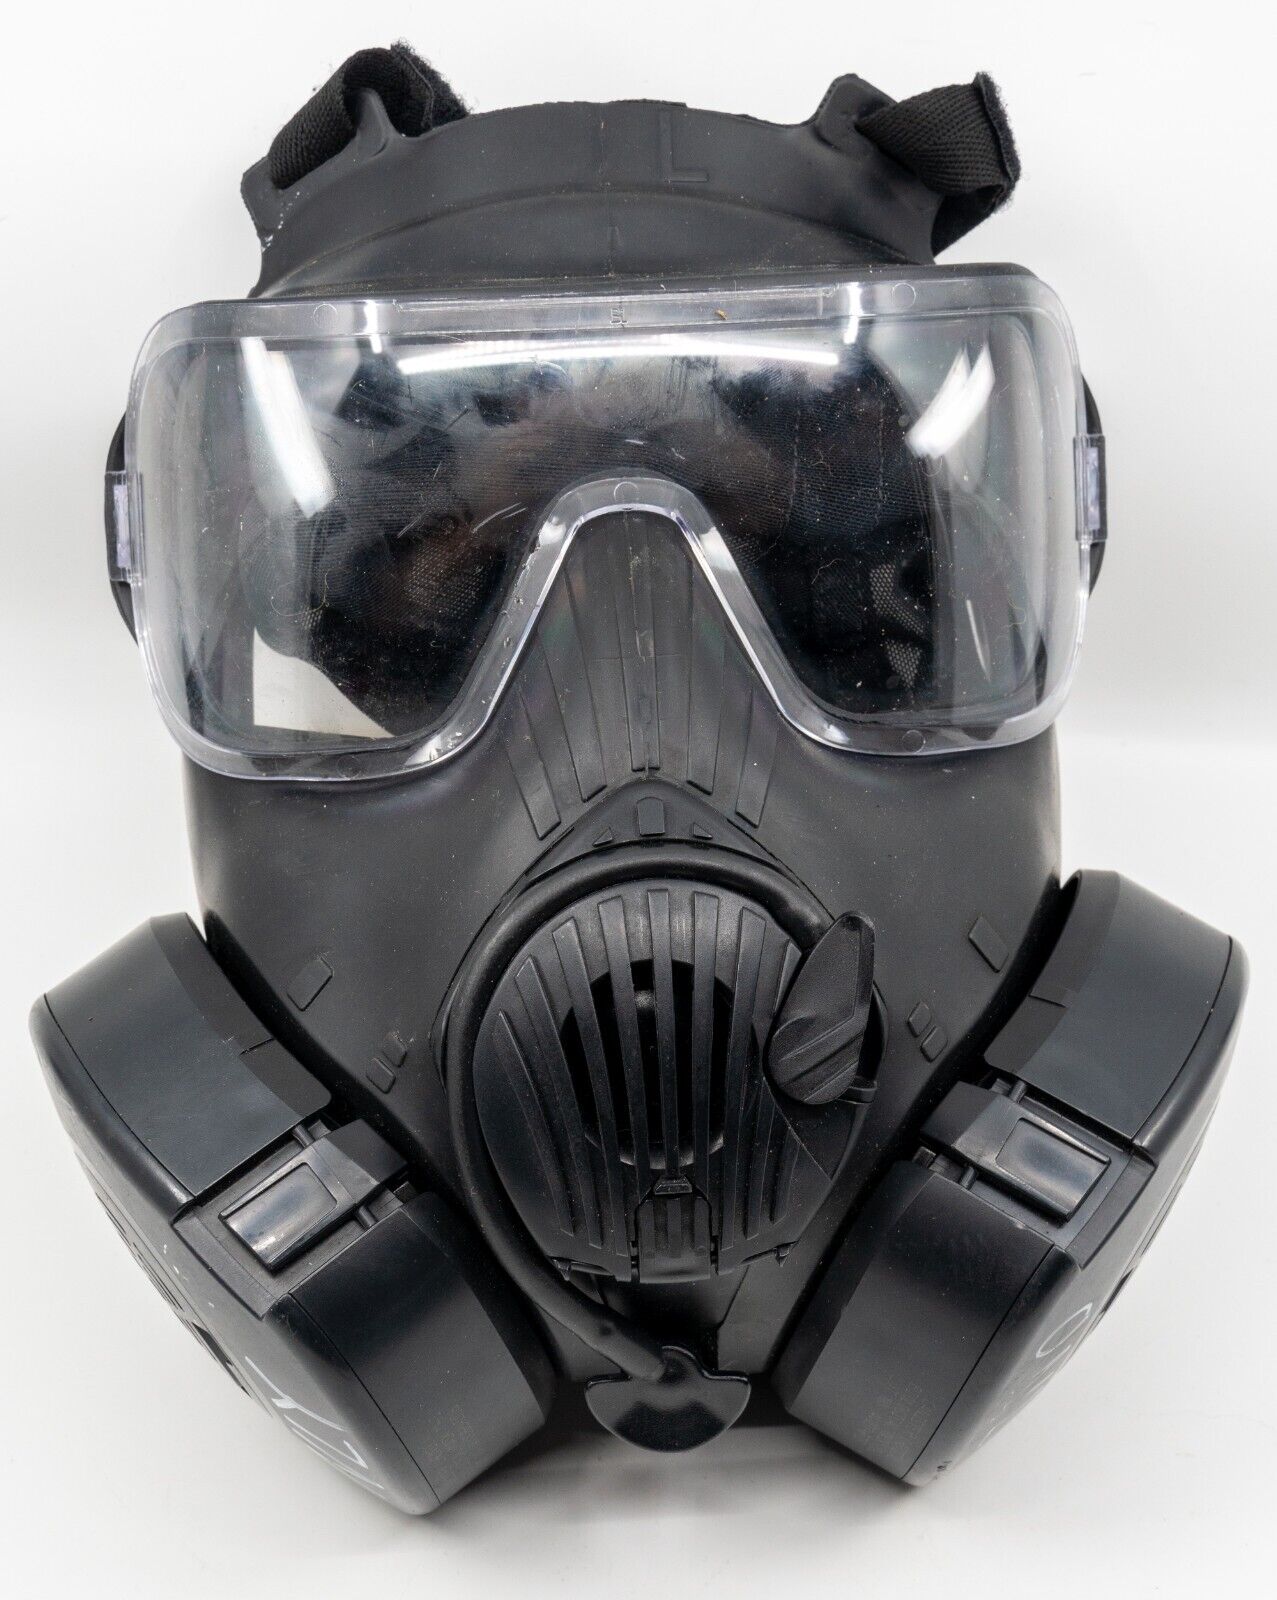 M50 Avon Gas Mask with Filters Size L Large